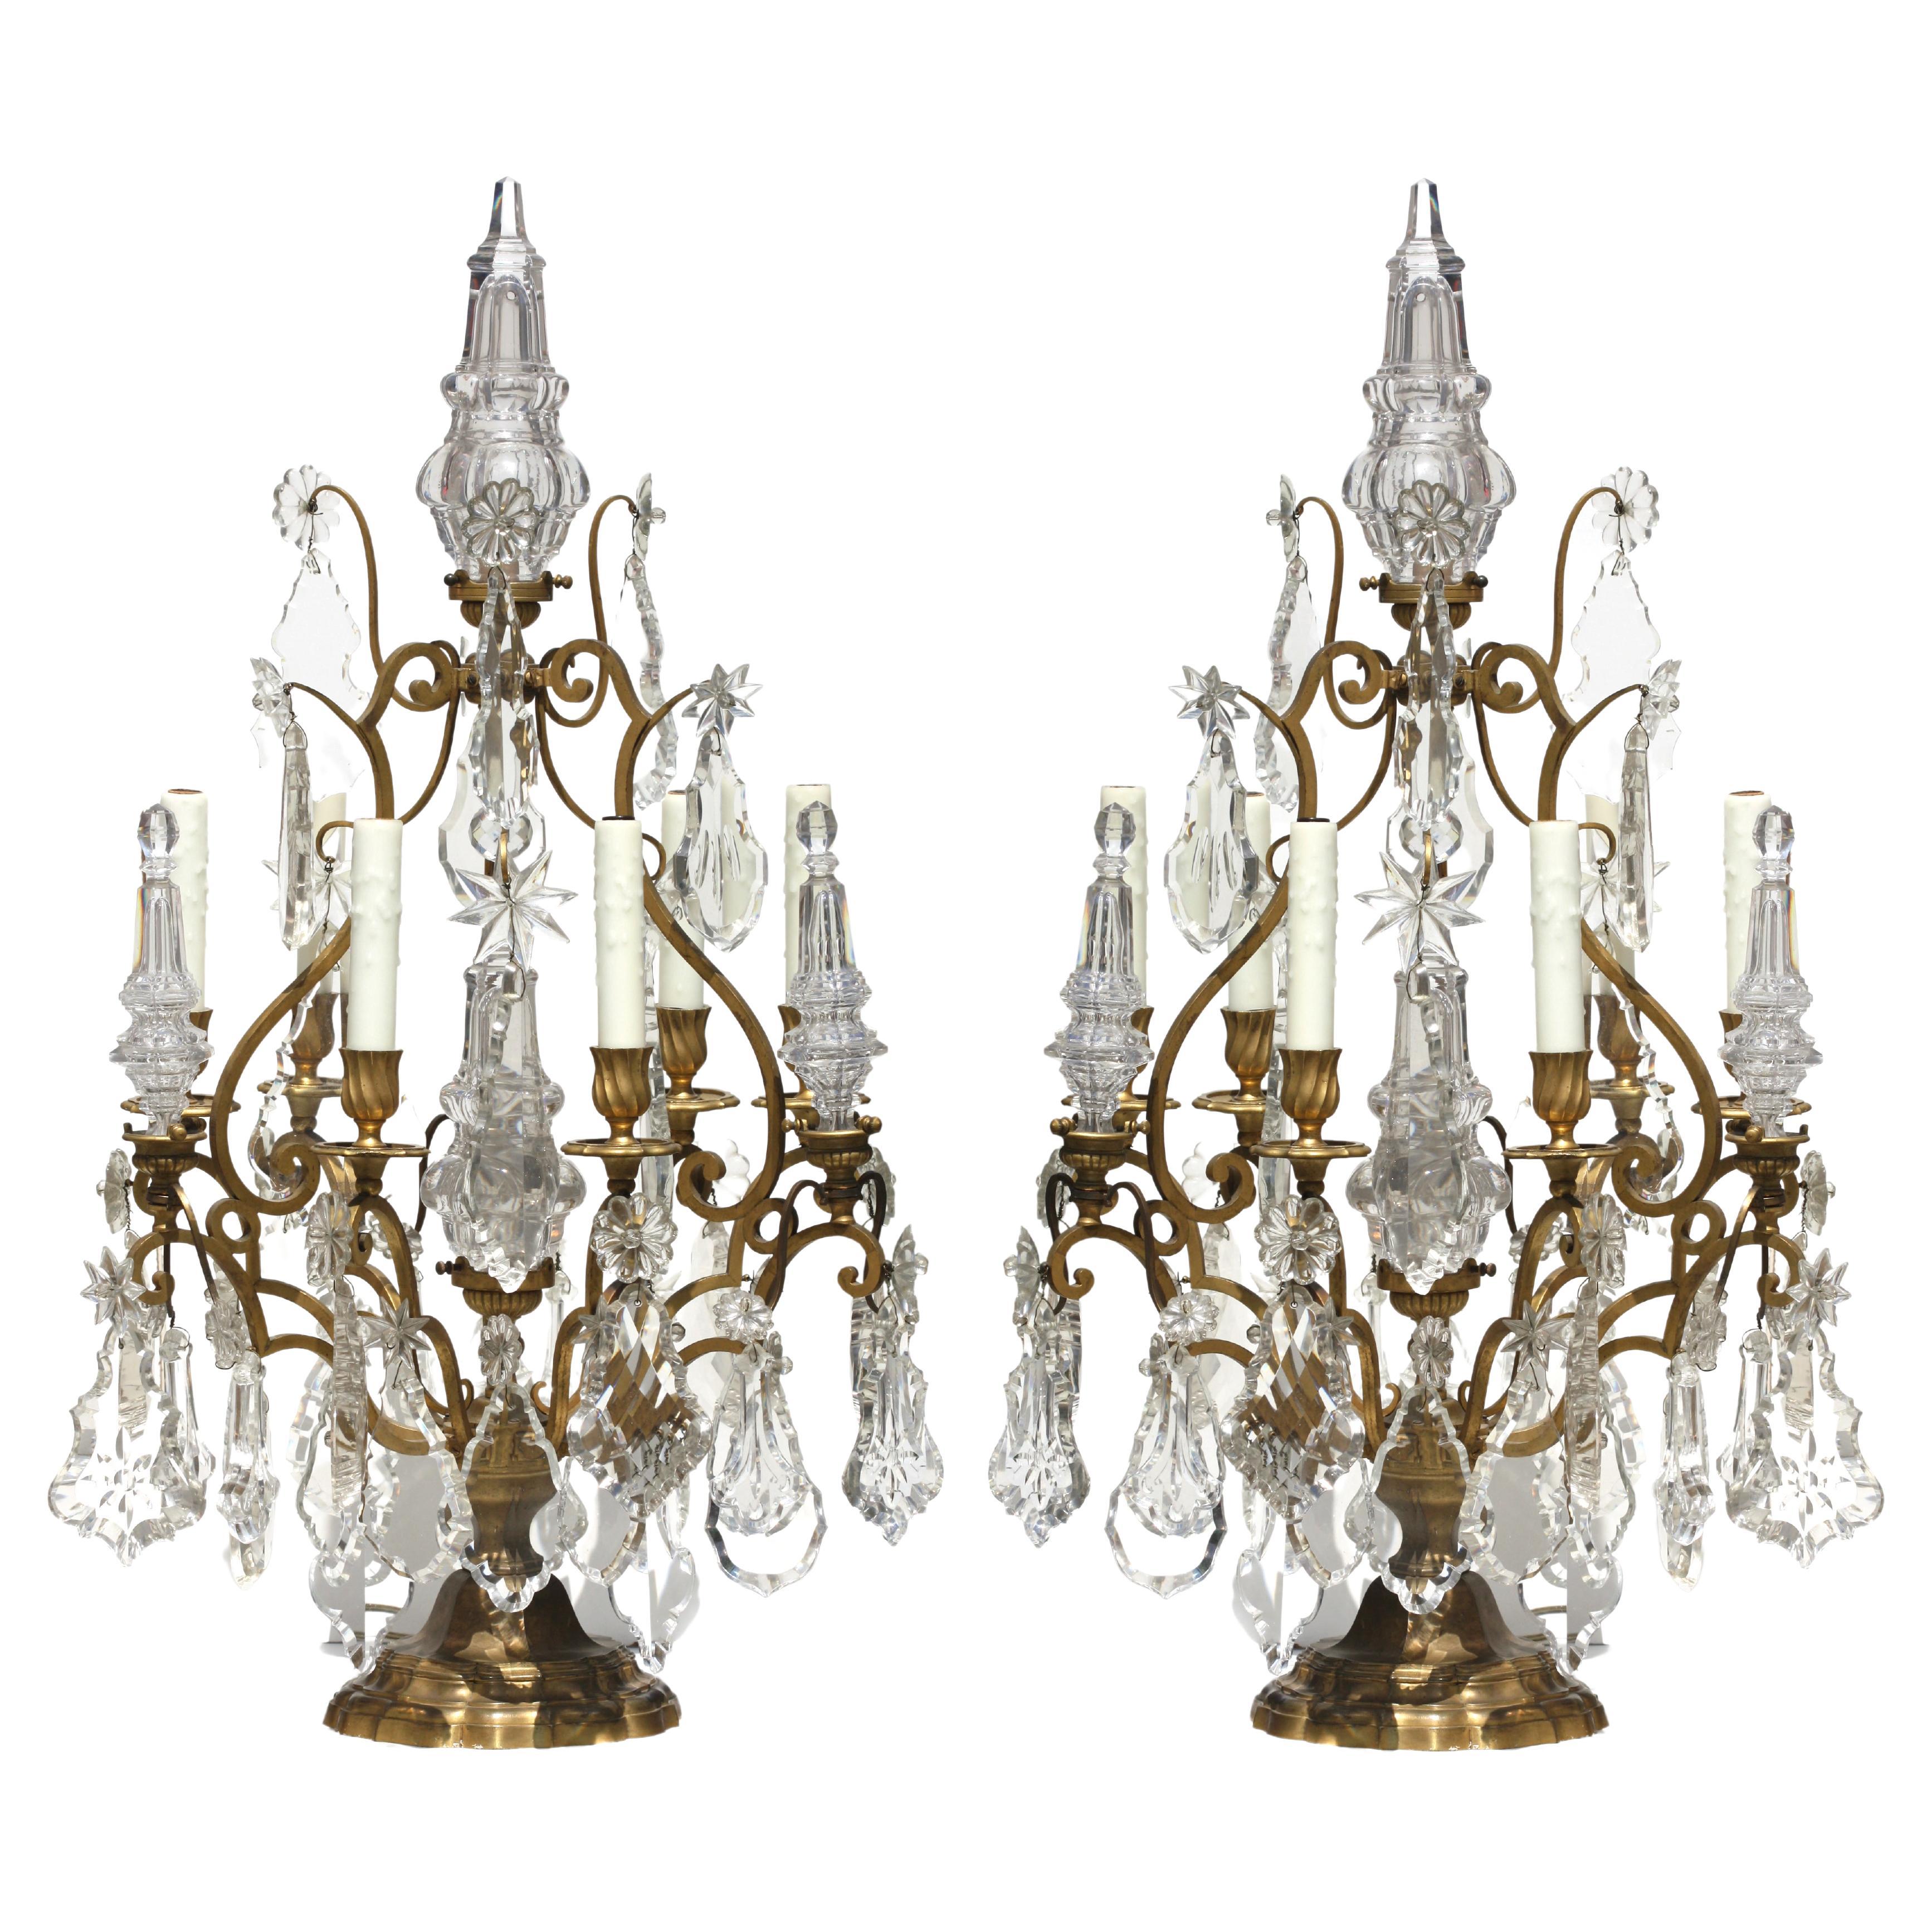 Pair of Fine Louis XV Style Gilt Bronze and Cut-Glass Eight-Light Girondoles For Sale